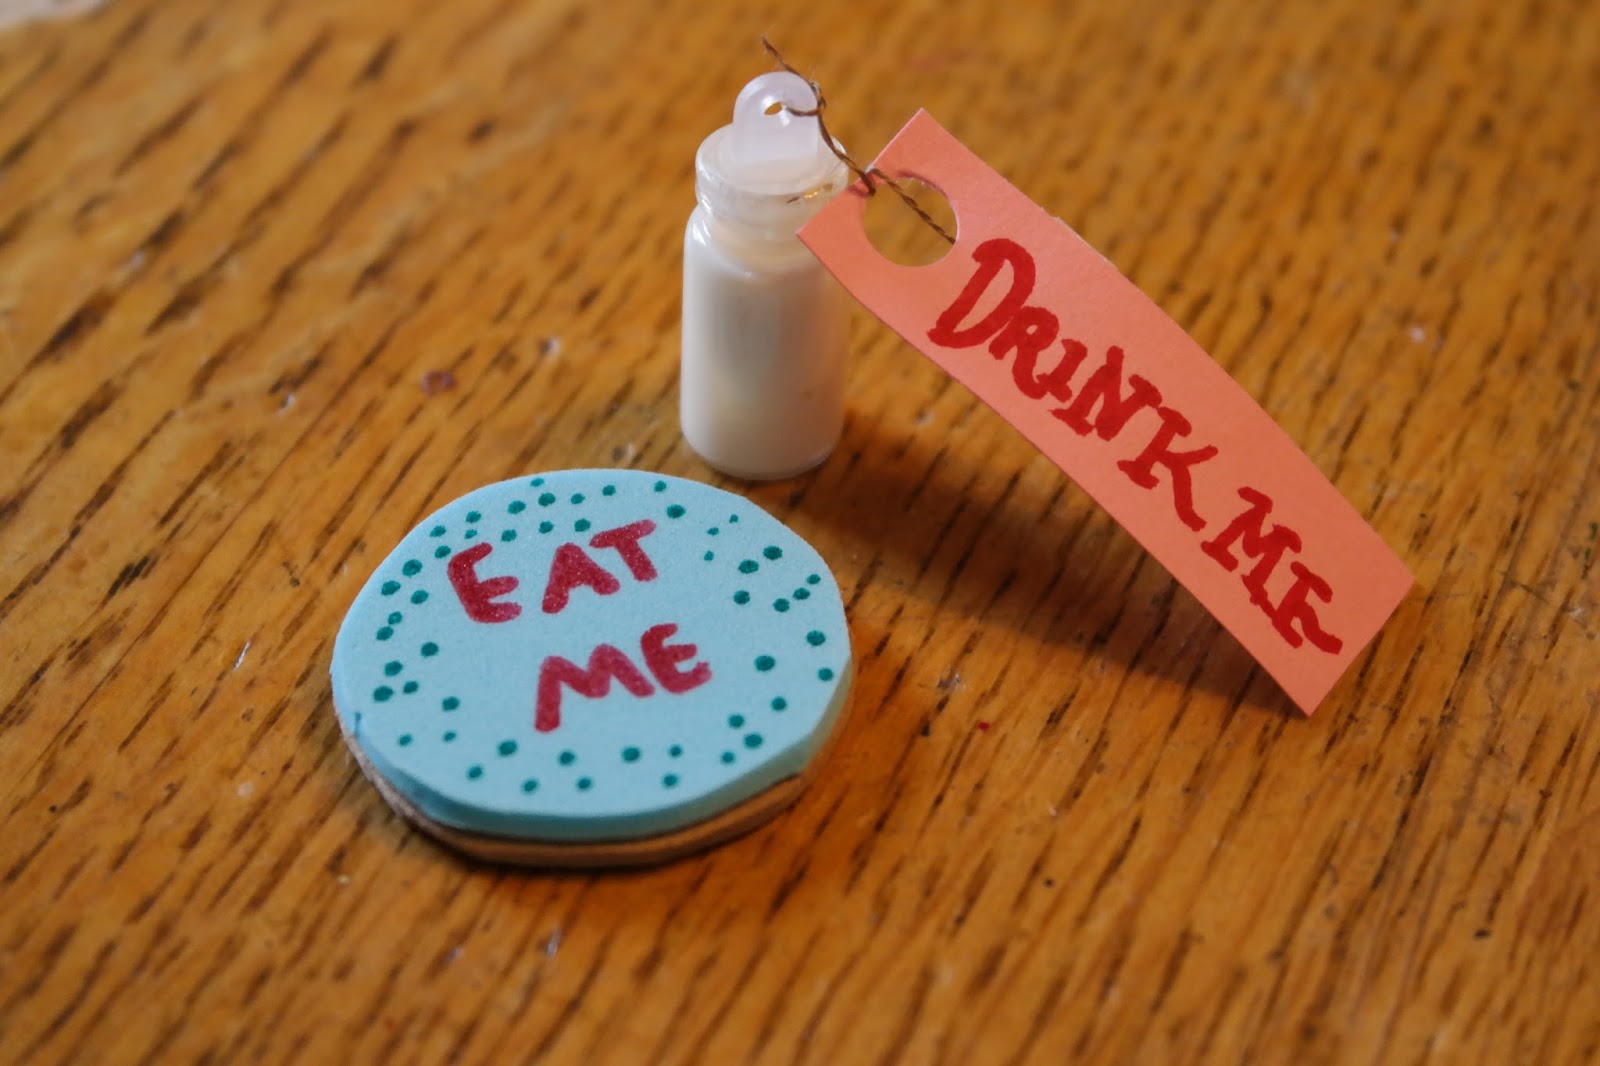 Carrot and Claire: Craft- How to Make an "Eat Me" Cookie and "Drink Me